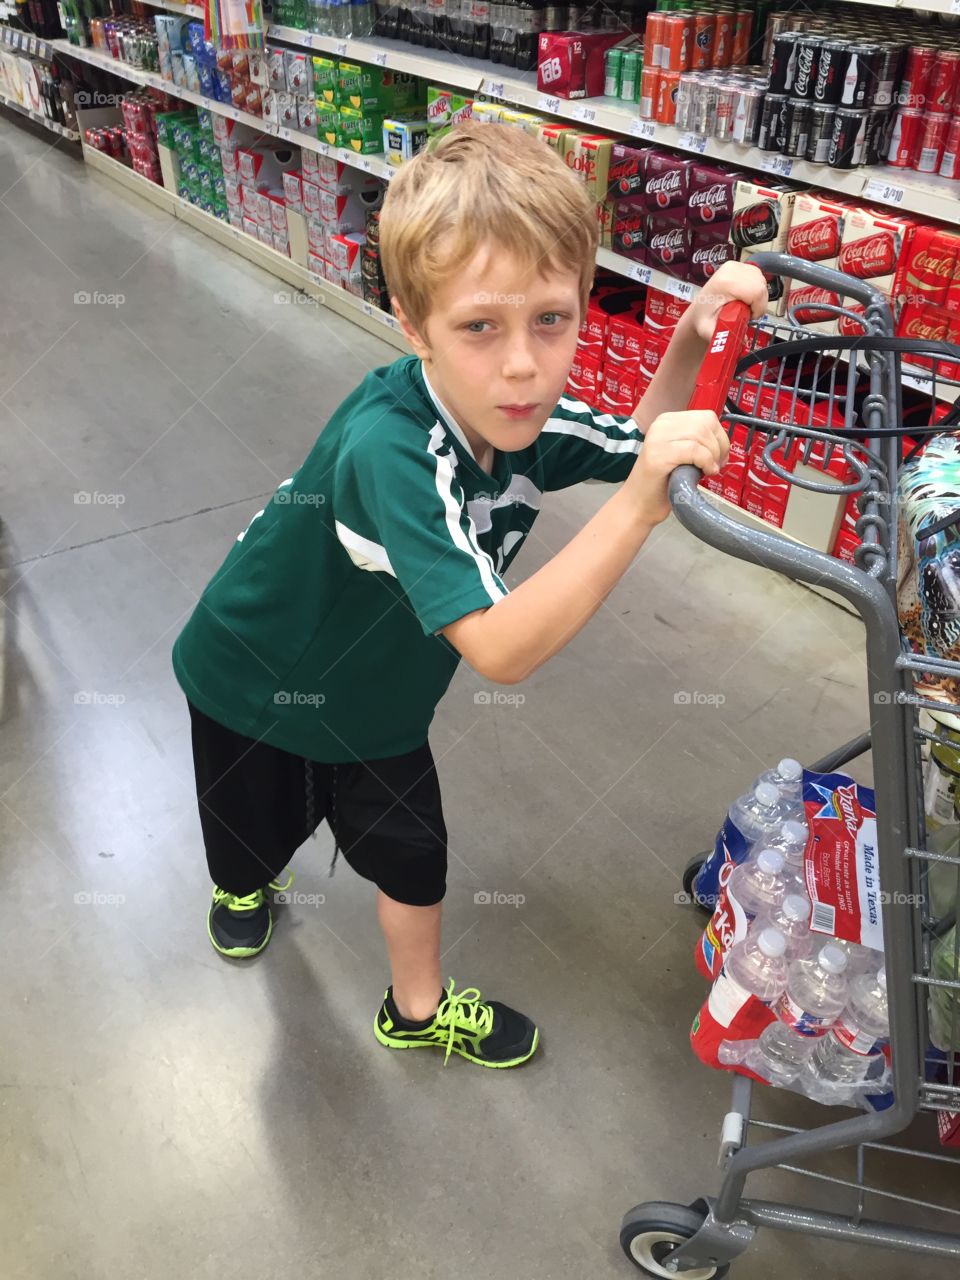 My youngest kiddo being silly at the supermarket 